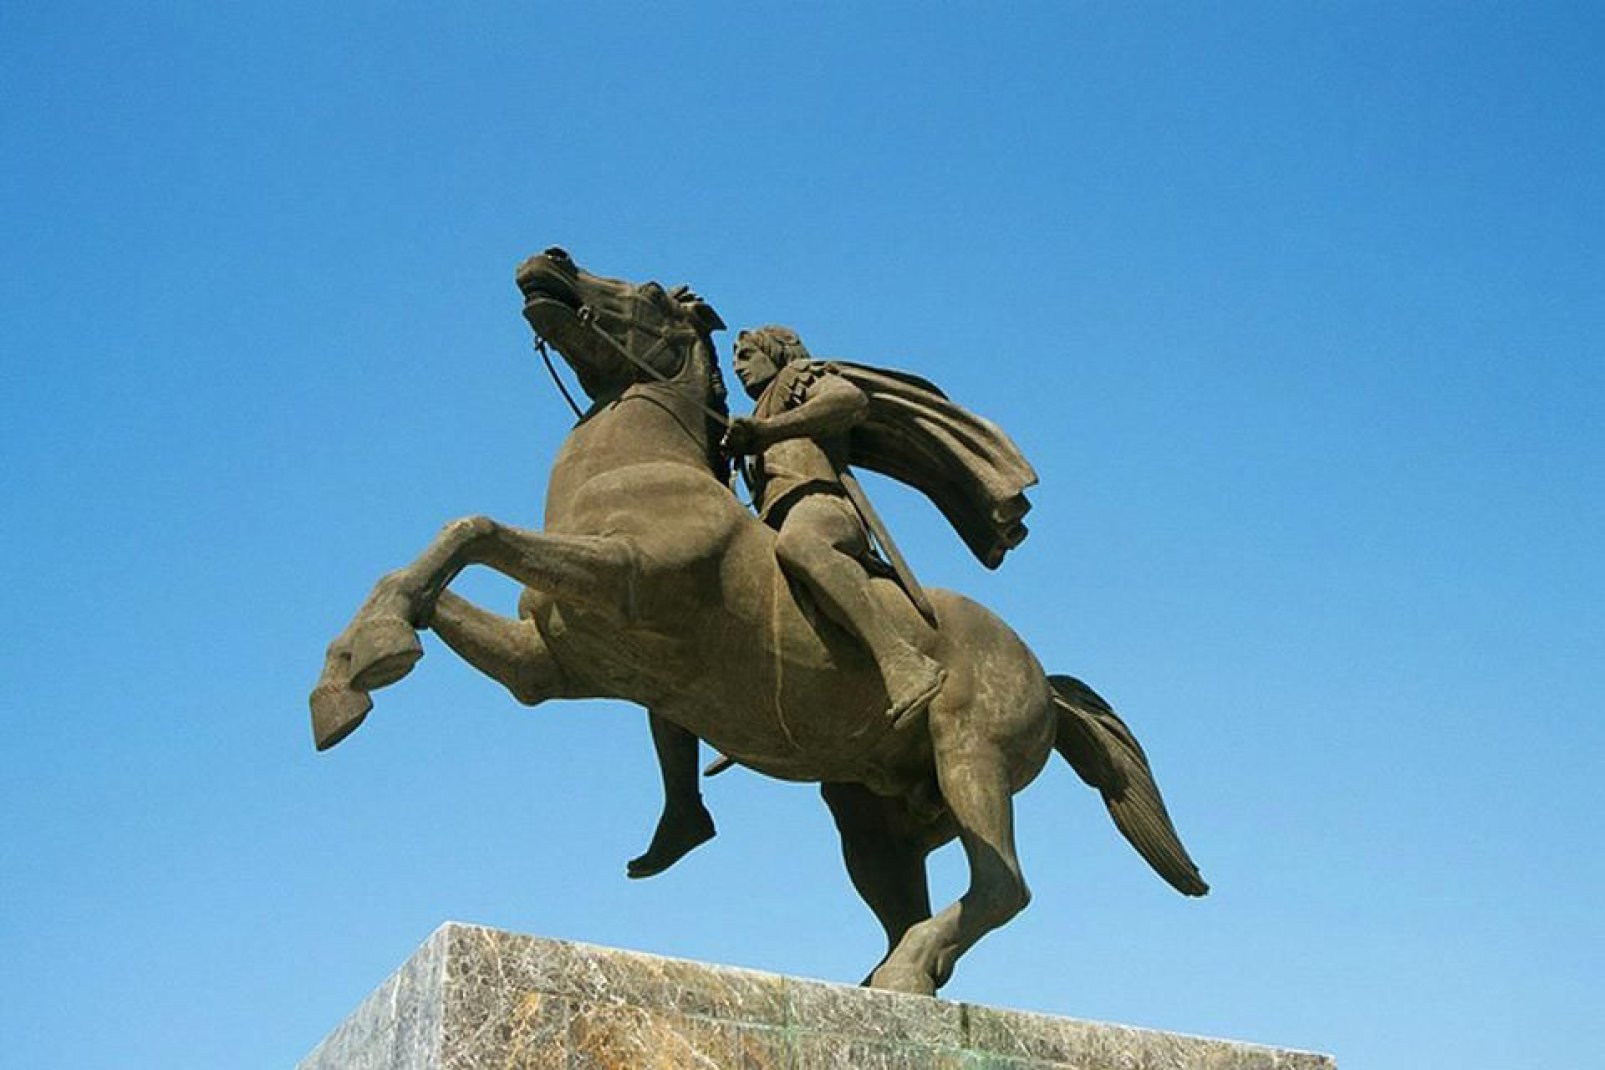 This statue was erected in memory of the son of Philip of Macedonia.